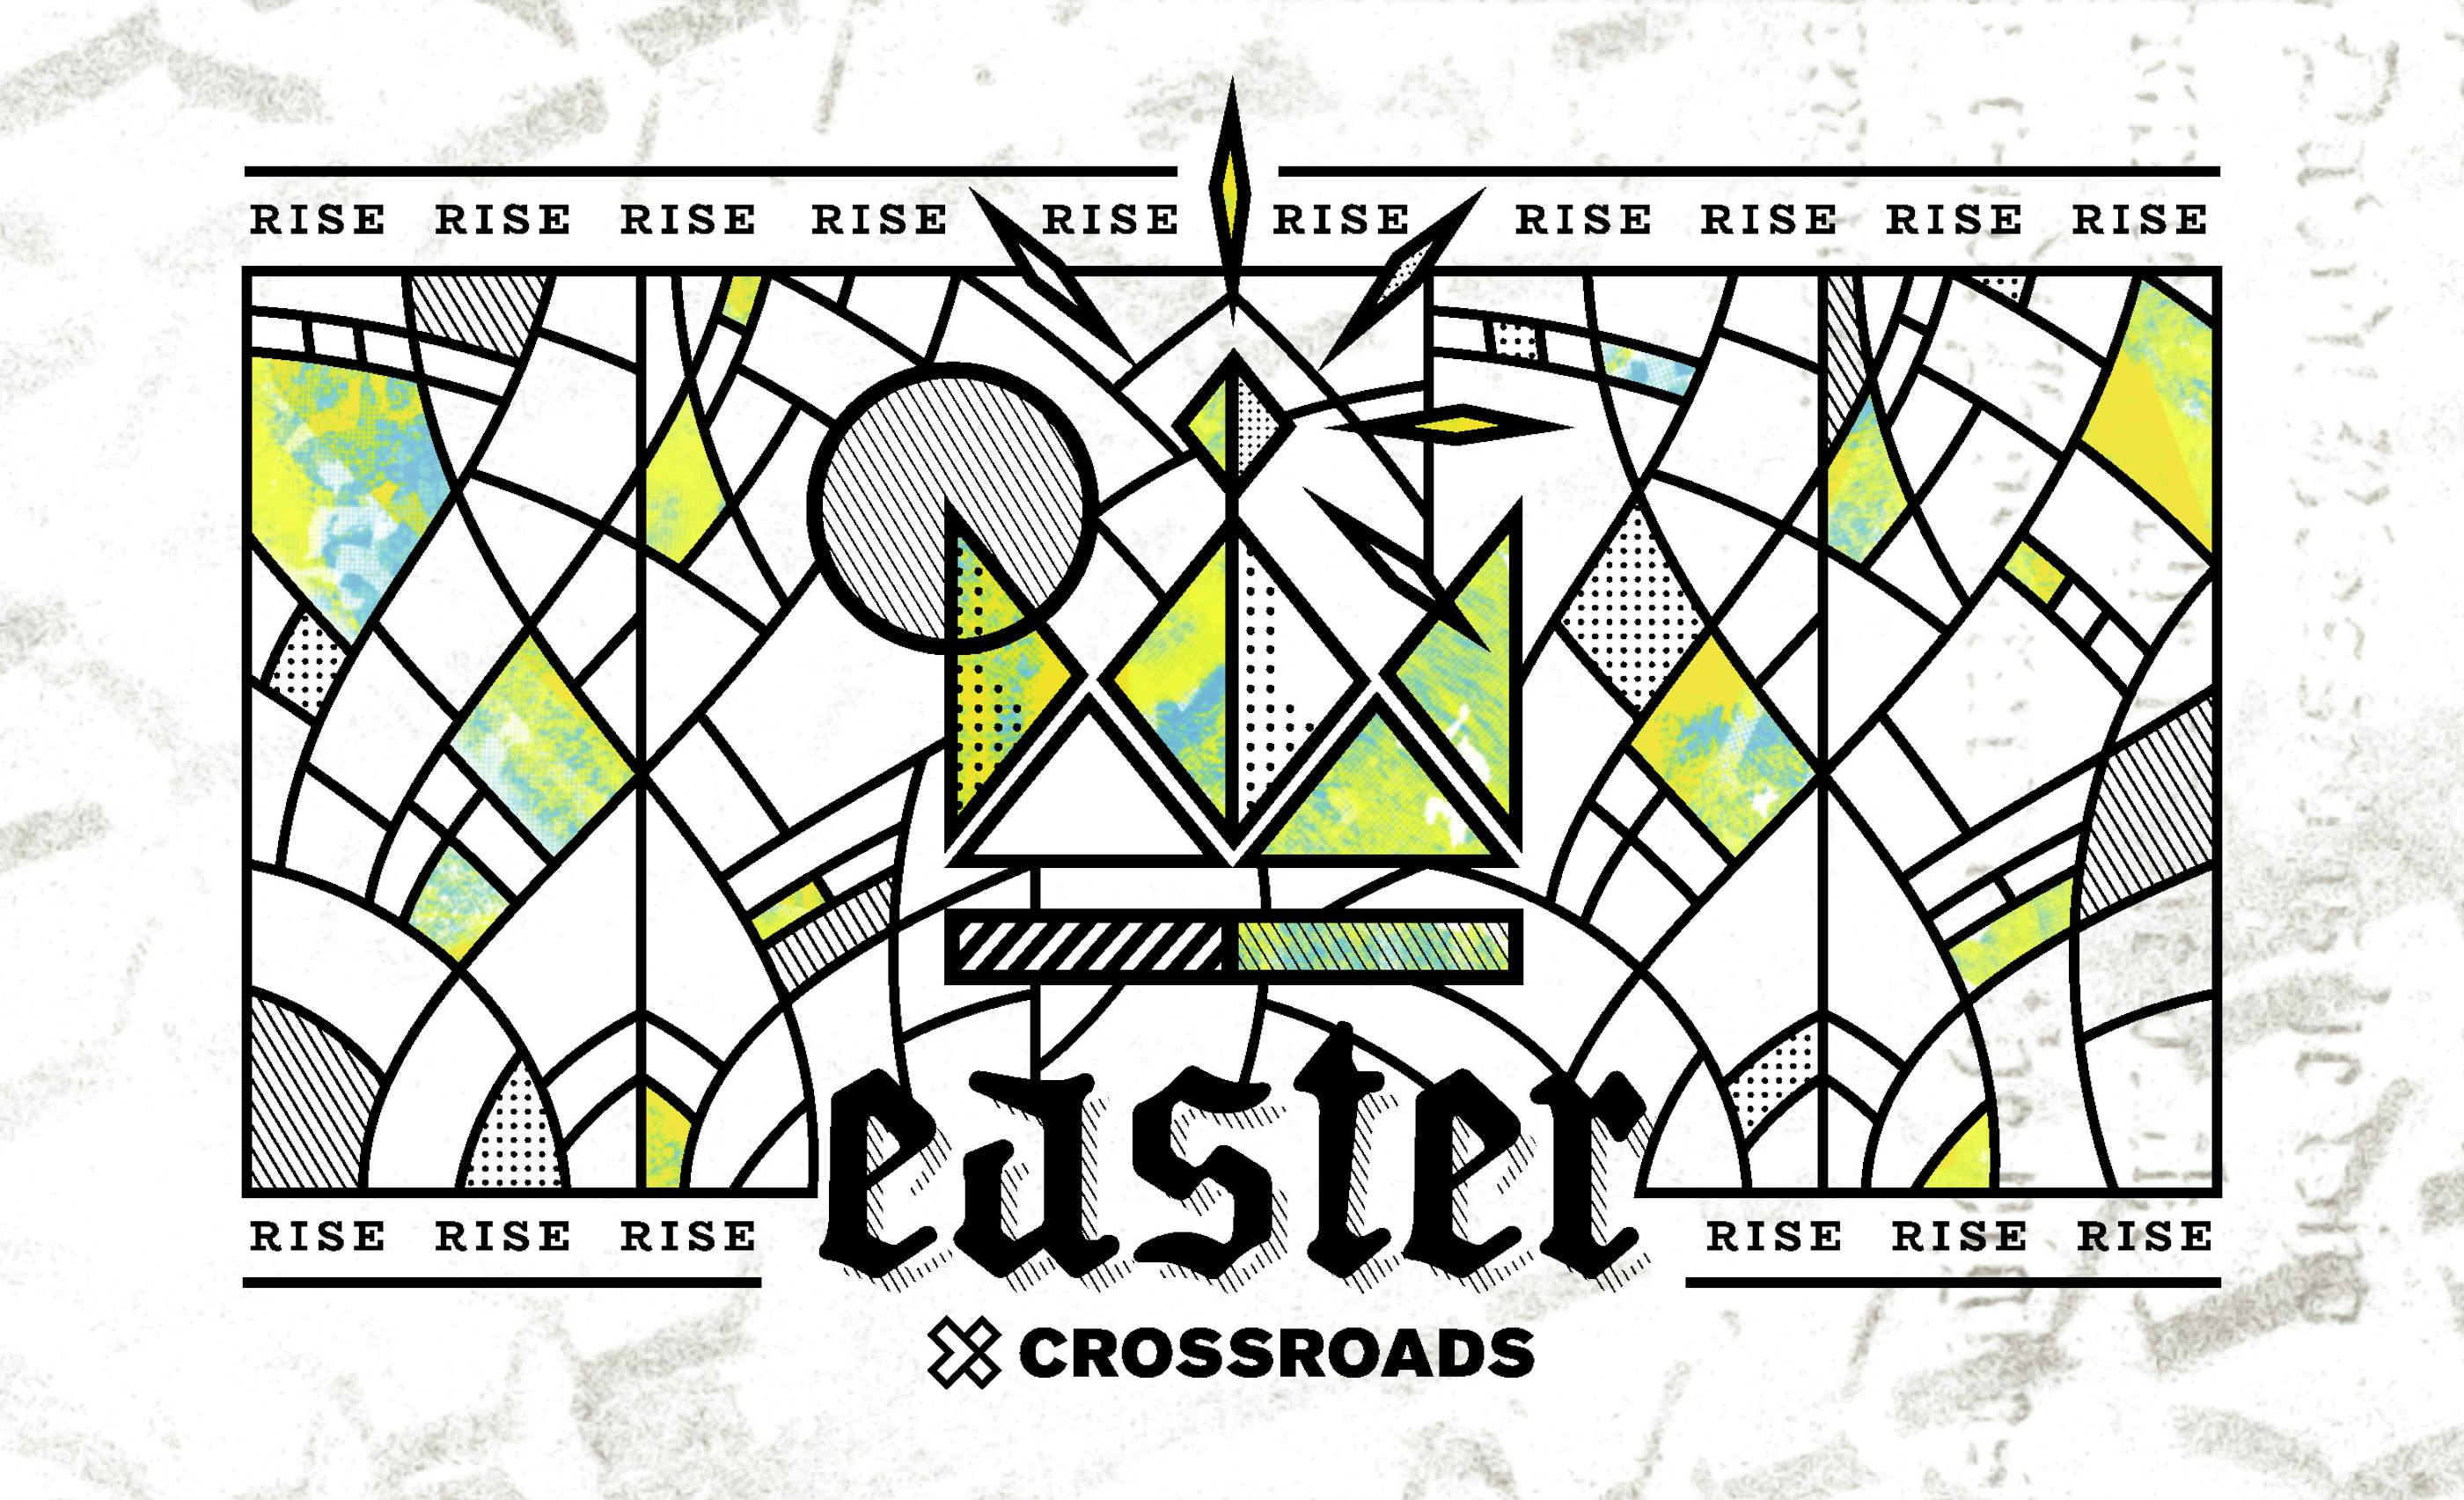 graphic design depicting easter